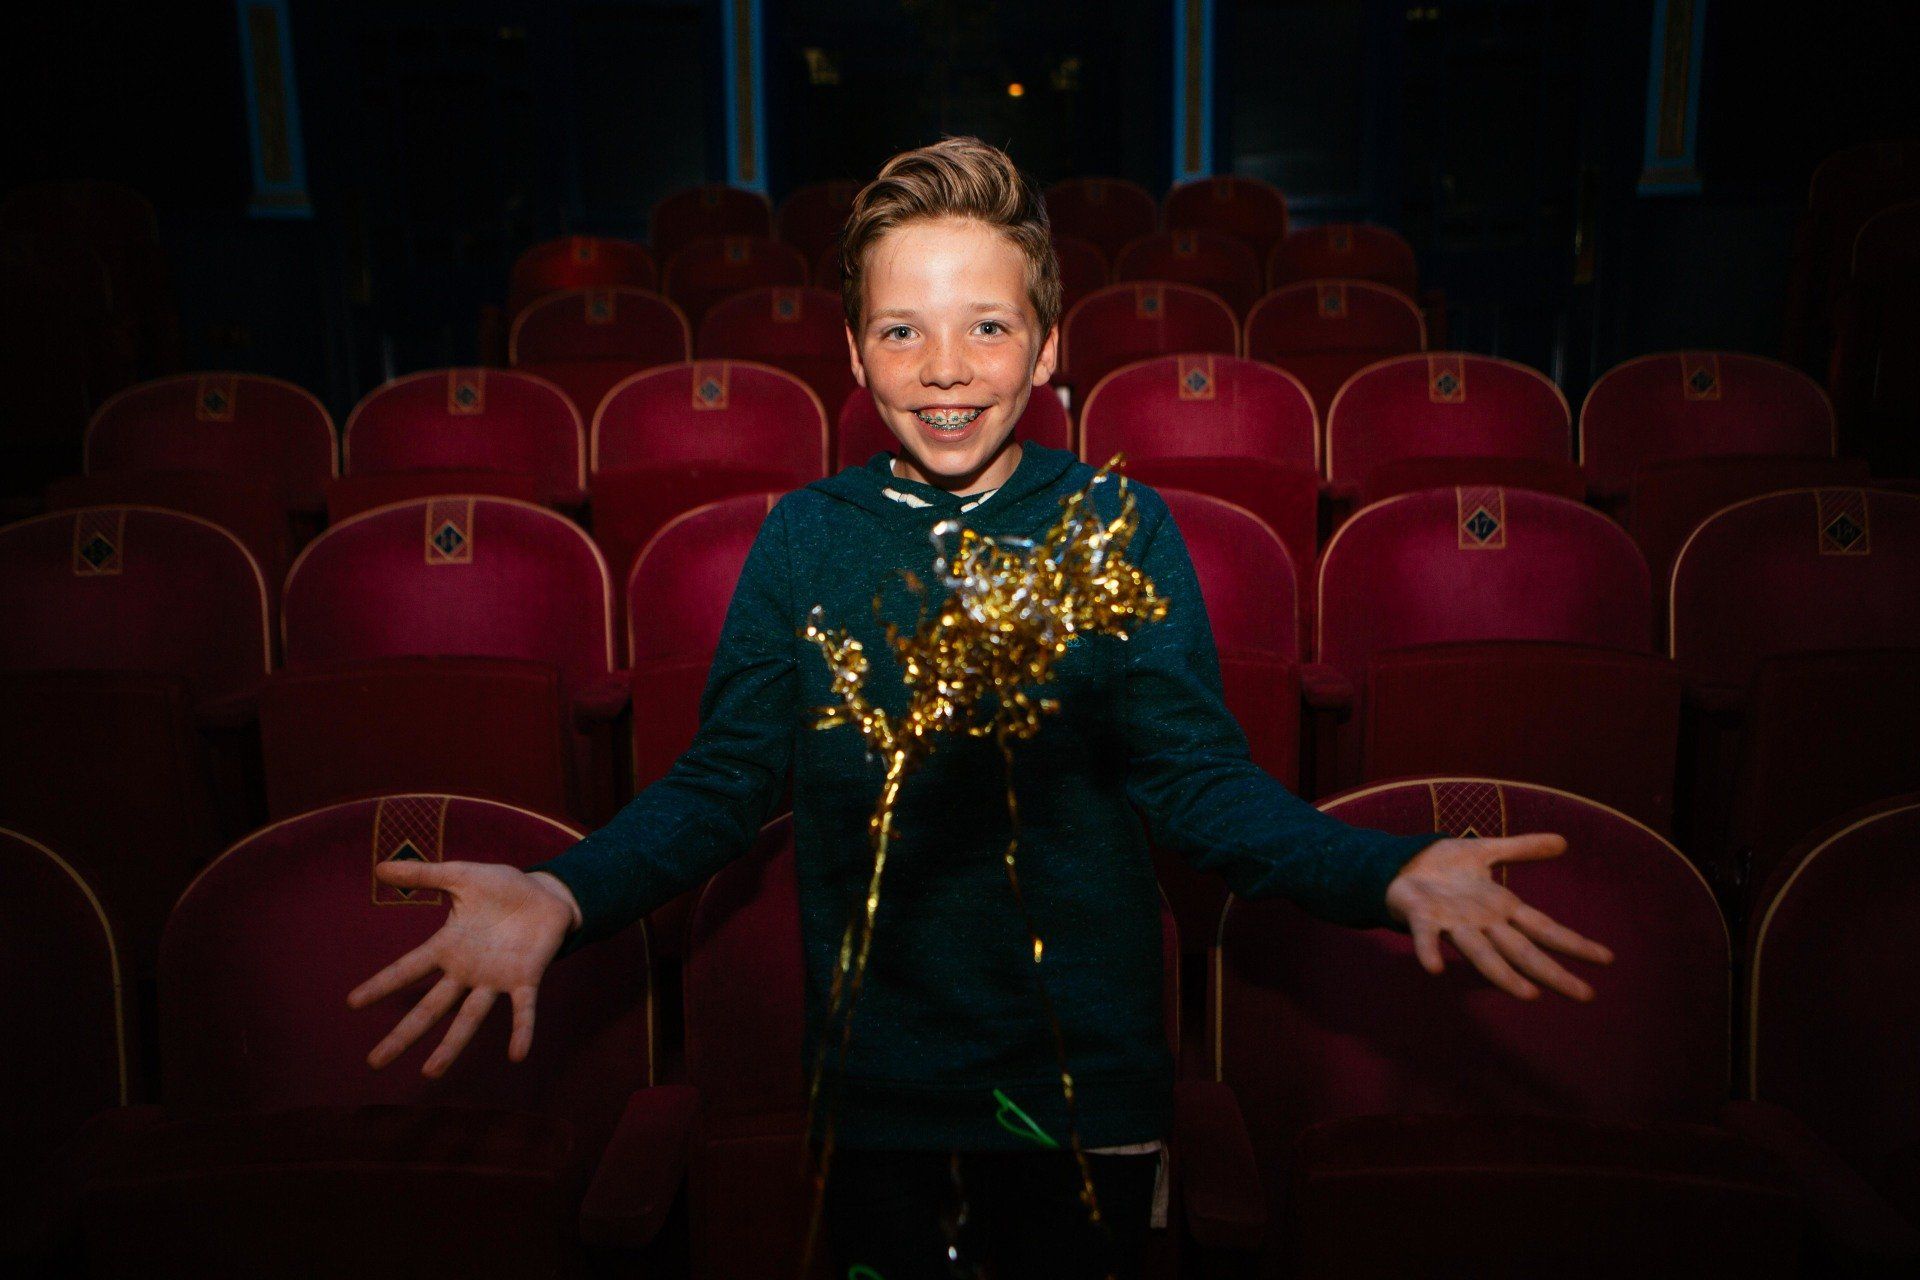 a young boy is standing in a theater holding a piece of gold confetti .